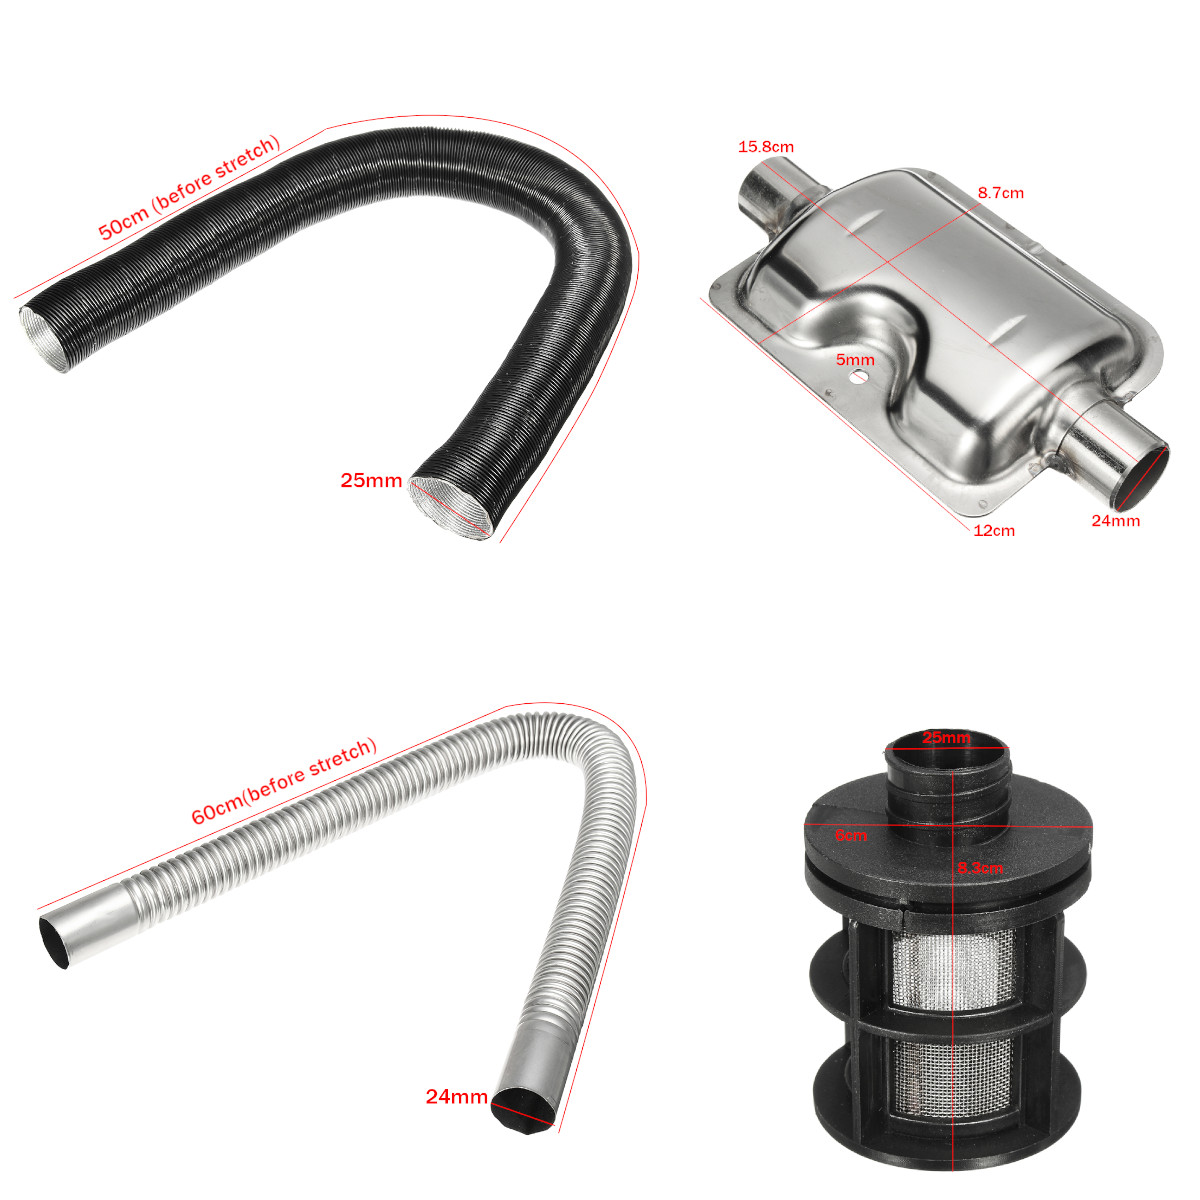 24mm-Exhaust-Silencer--25mm-Filter-Exhaust-and-Intake-Pipe-for-Air-Diesel-Heater-Accessories-1396670-10